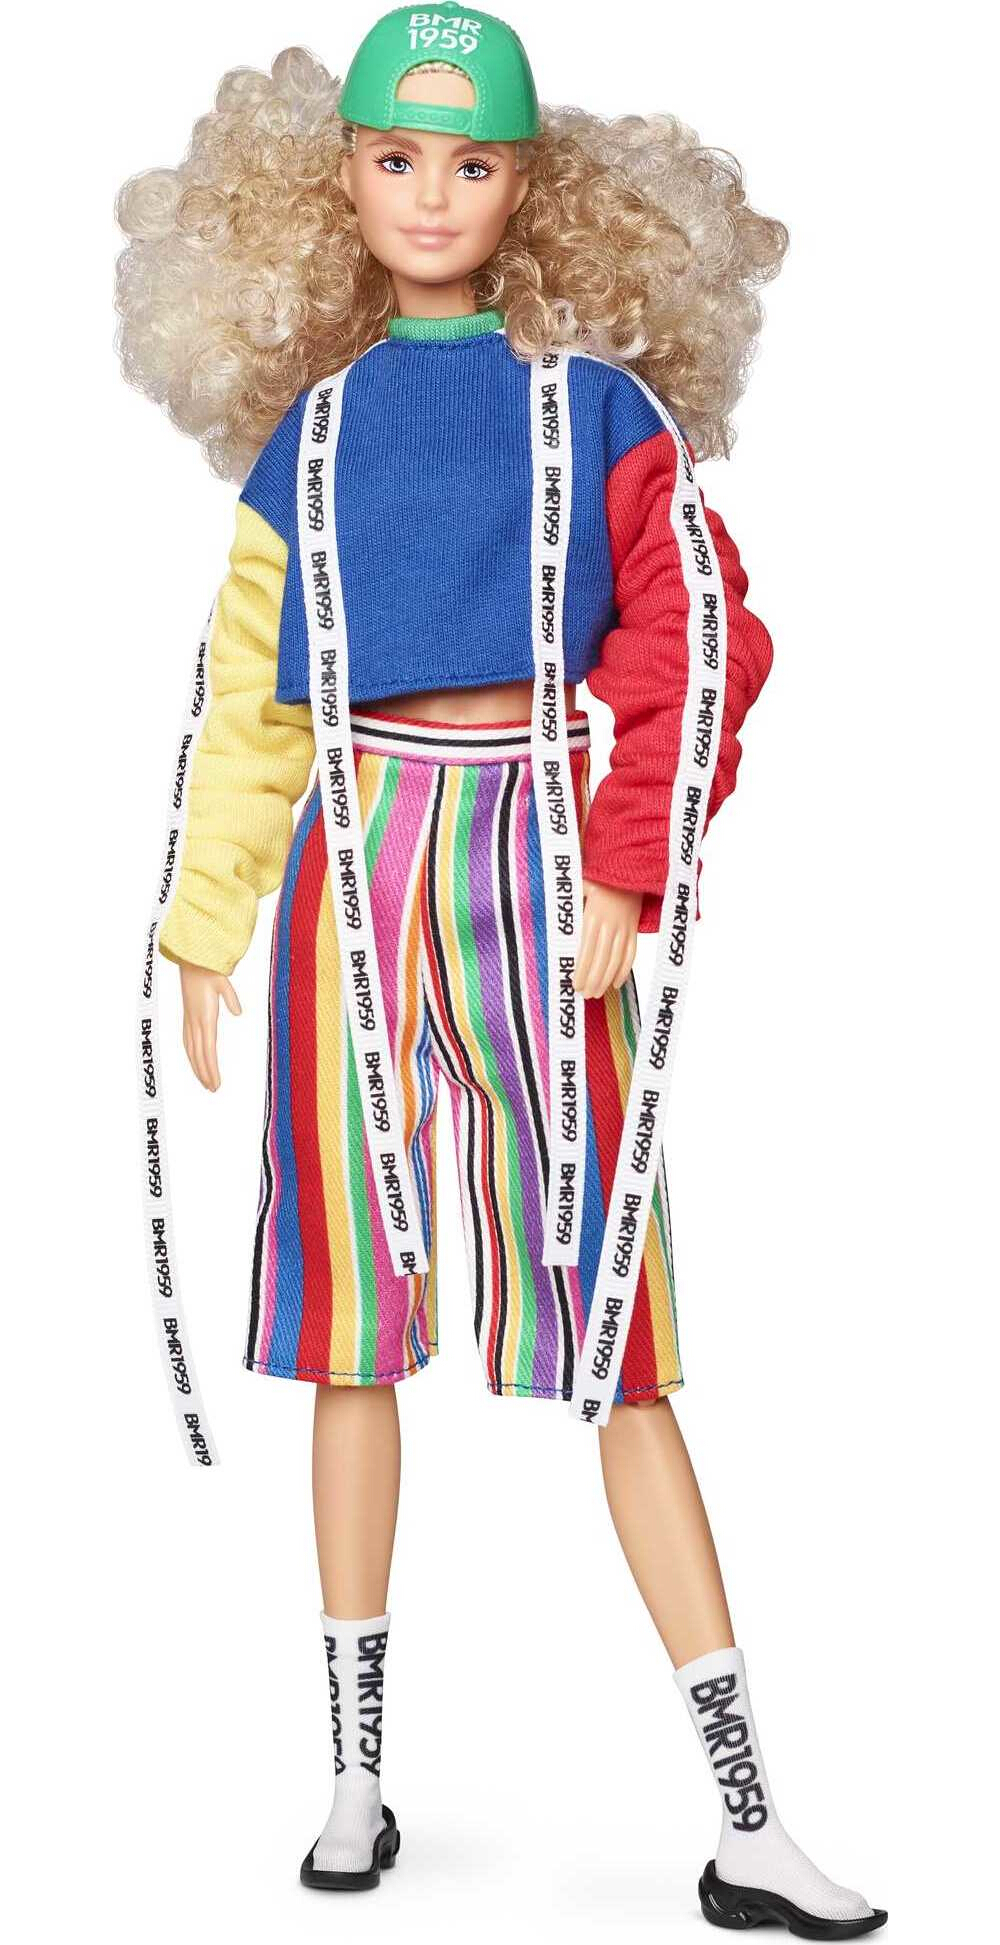 Barbie Bmr1959 - Color Block Sweatshirt with Logo Tape & Striped Shorts - image 1 of 7